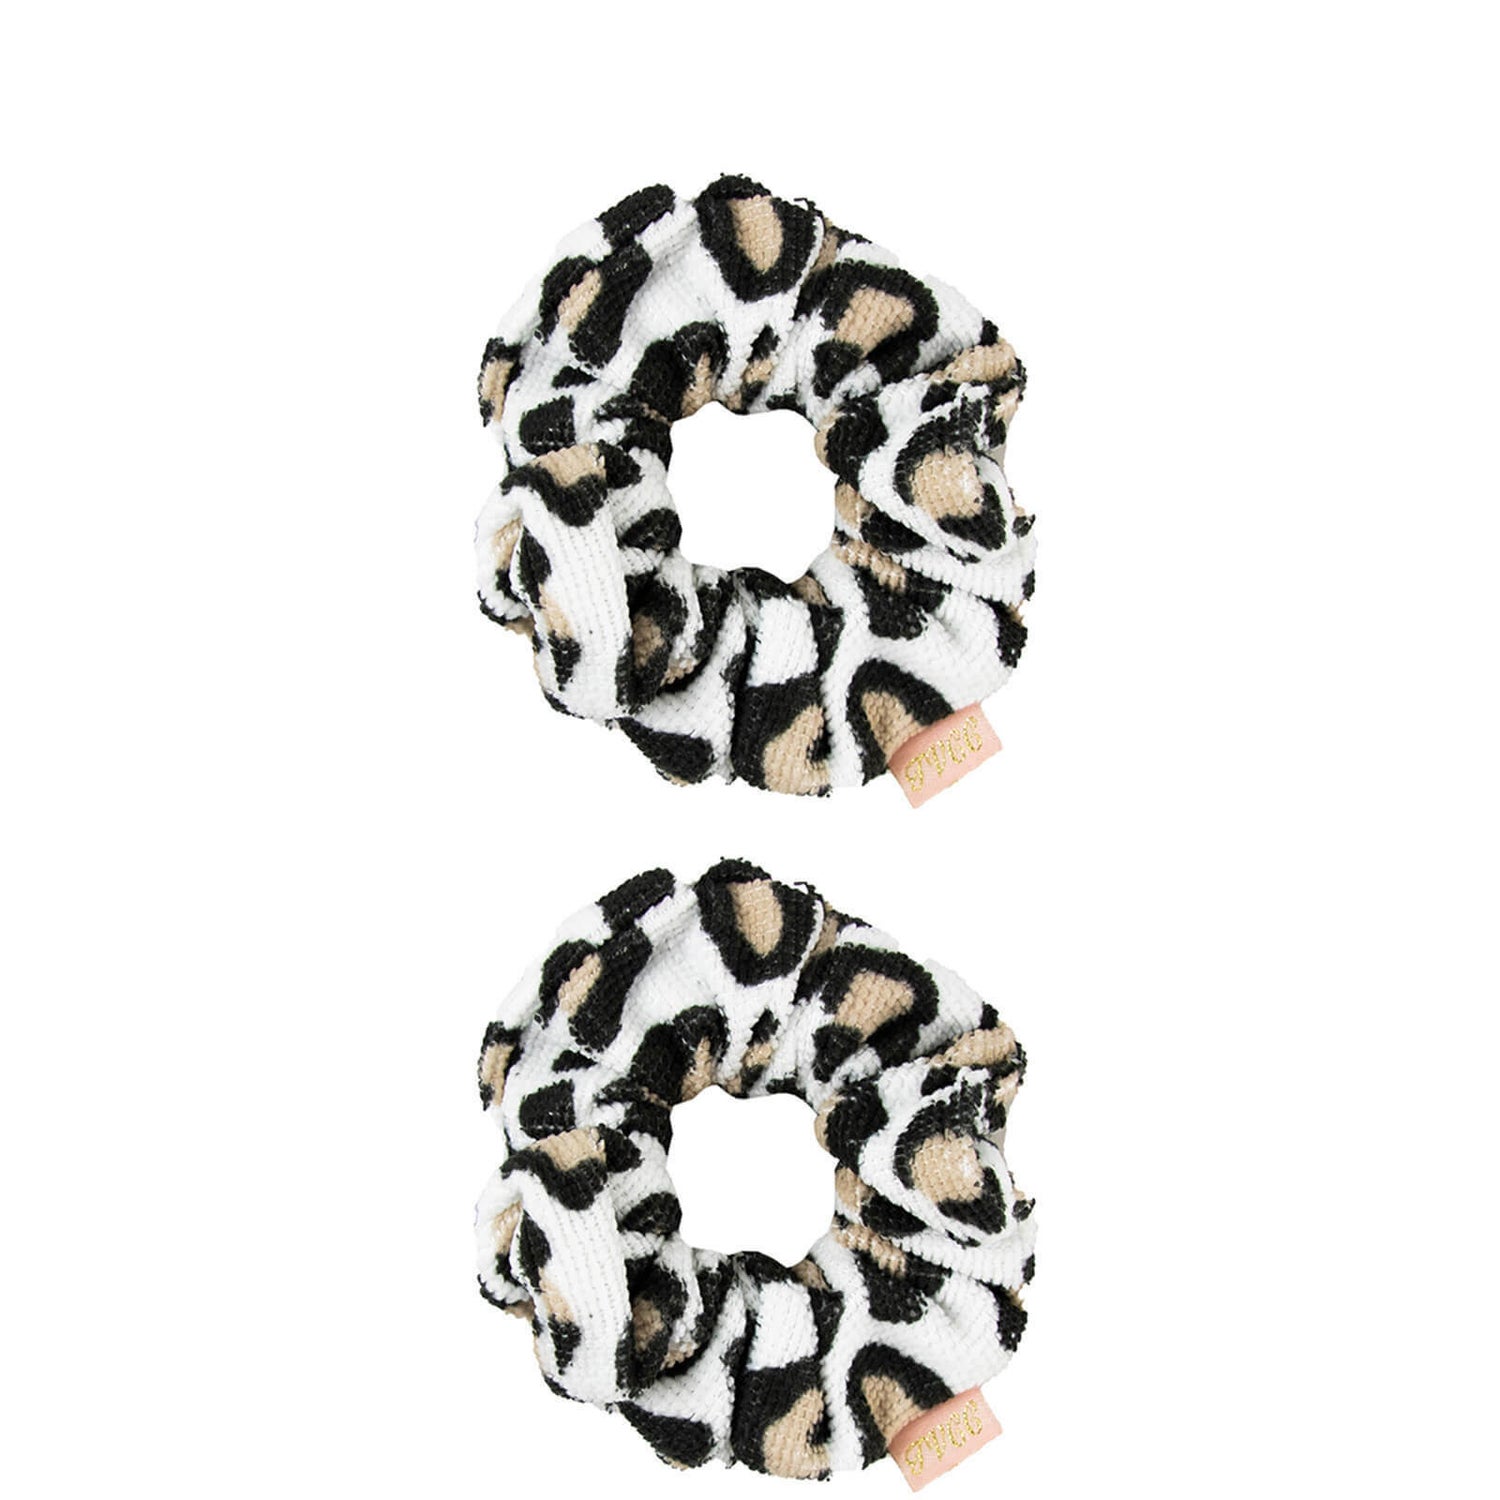 The Vintage Cosmetic Company Shower Microfibre Hair Scrunchies - Leopard Print (2 Pack)